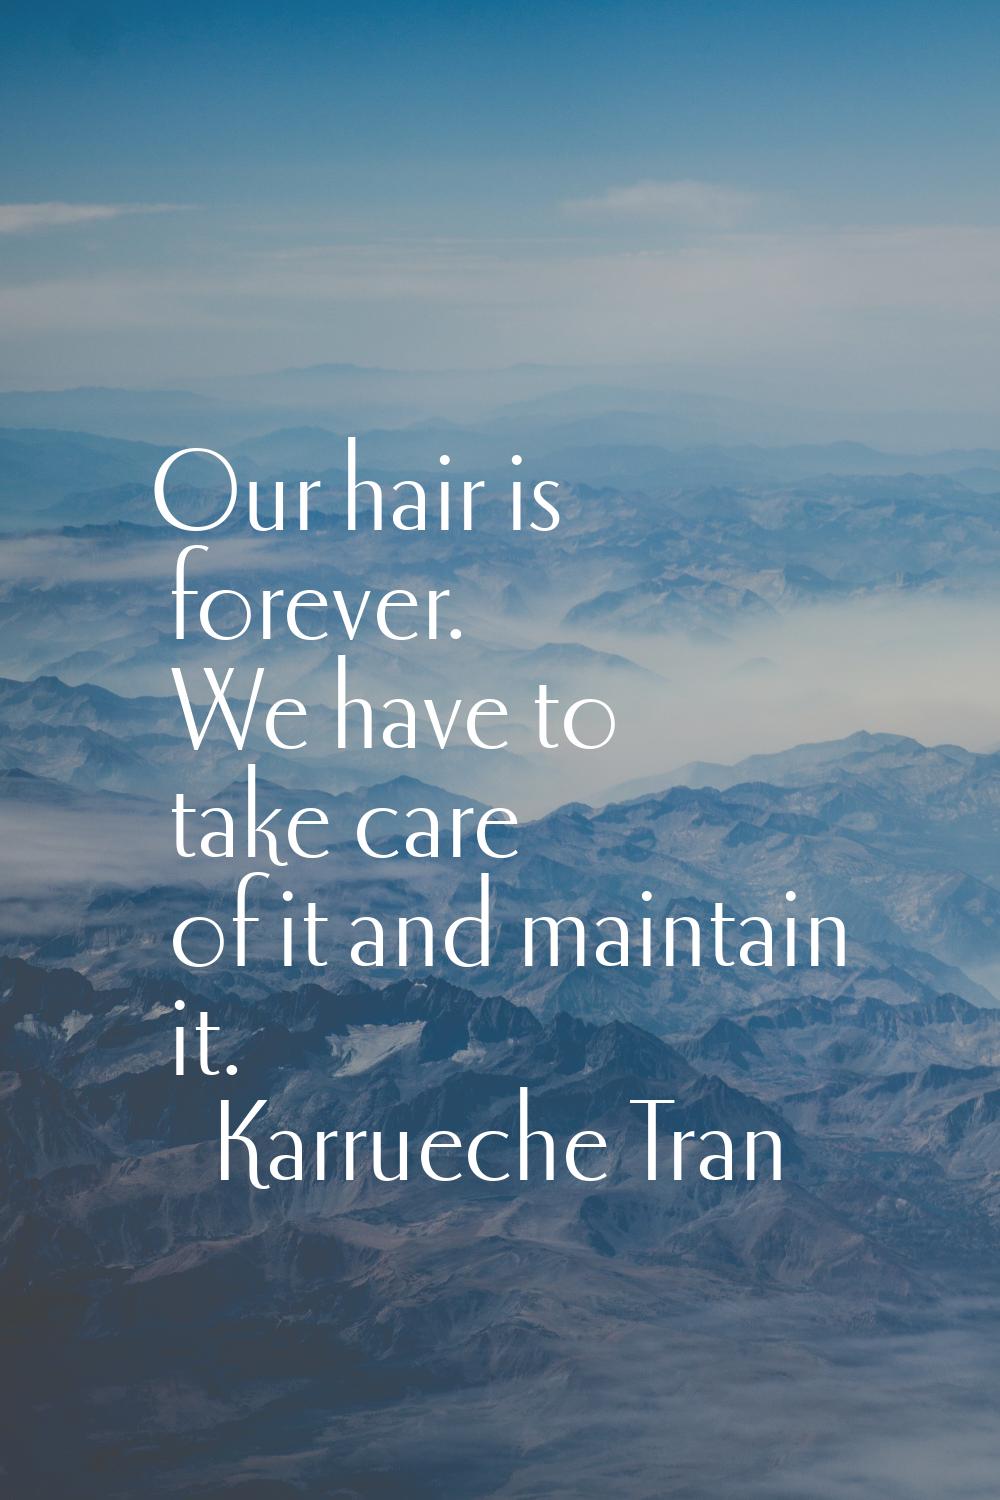 Our hair is forever. We have to take care of it and maintain it.